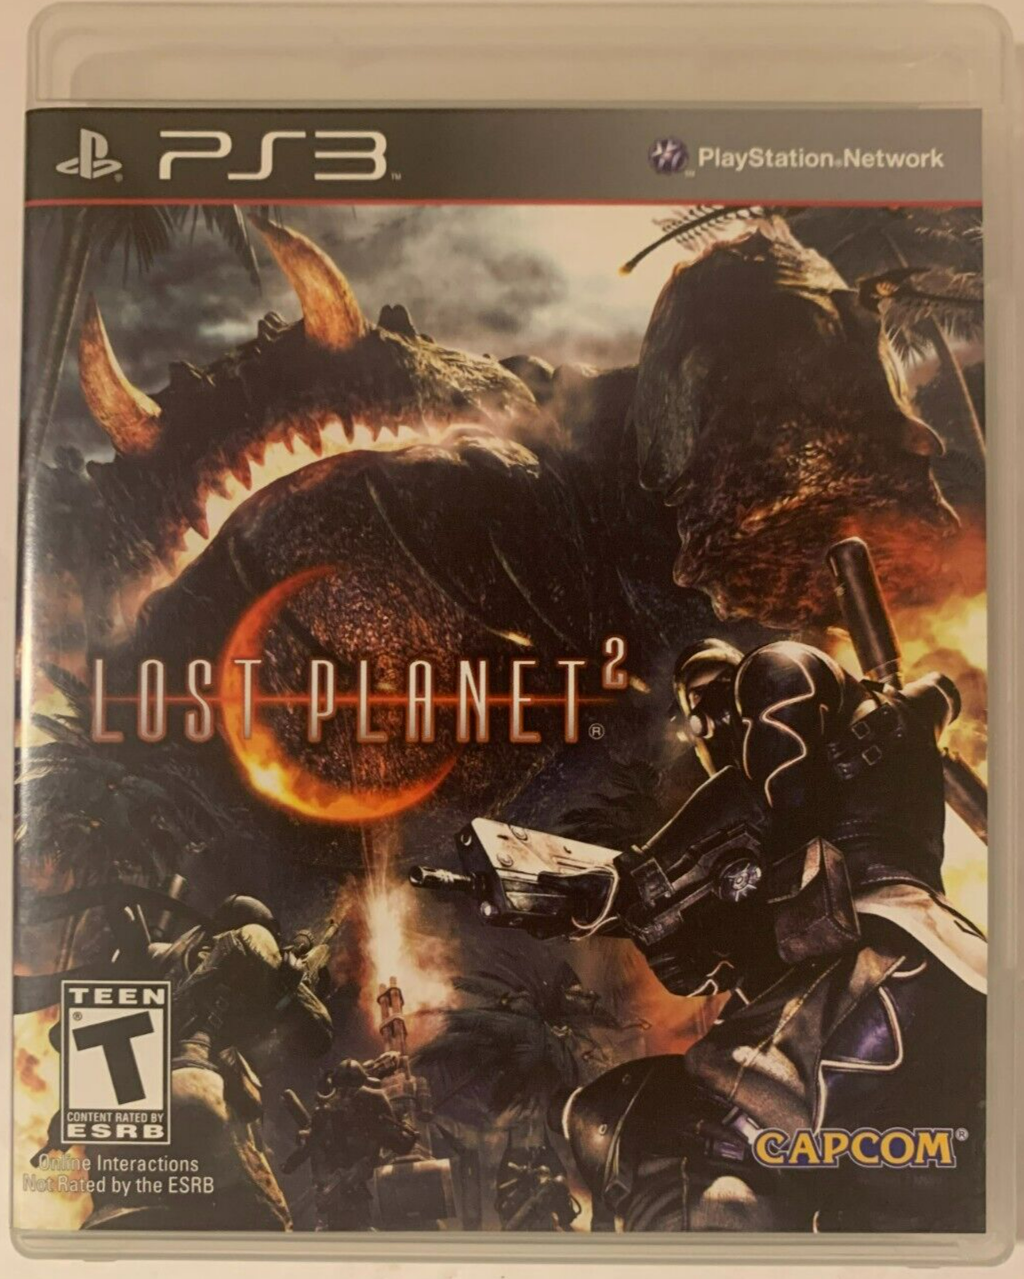 Primary image for Lost Planet 2 (Sony PlayStation 3, 2010): PS3 Shooter, Action, Adventure